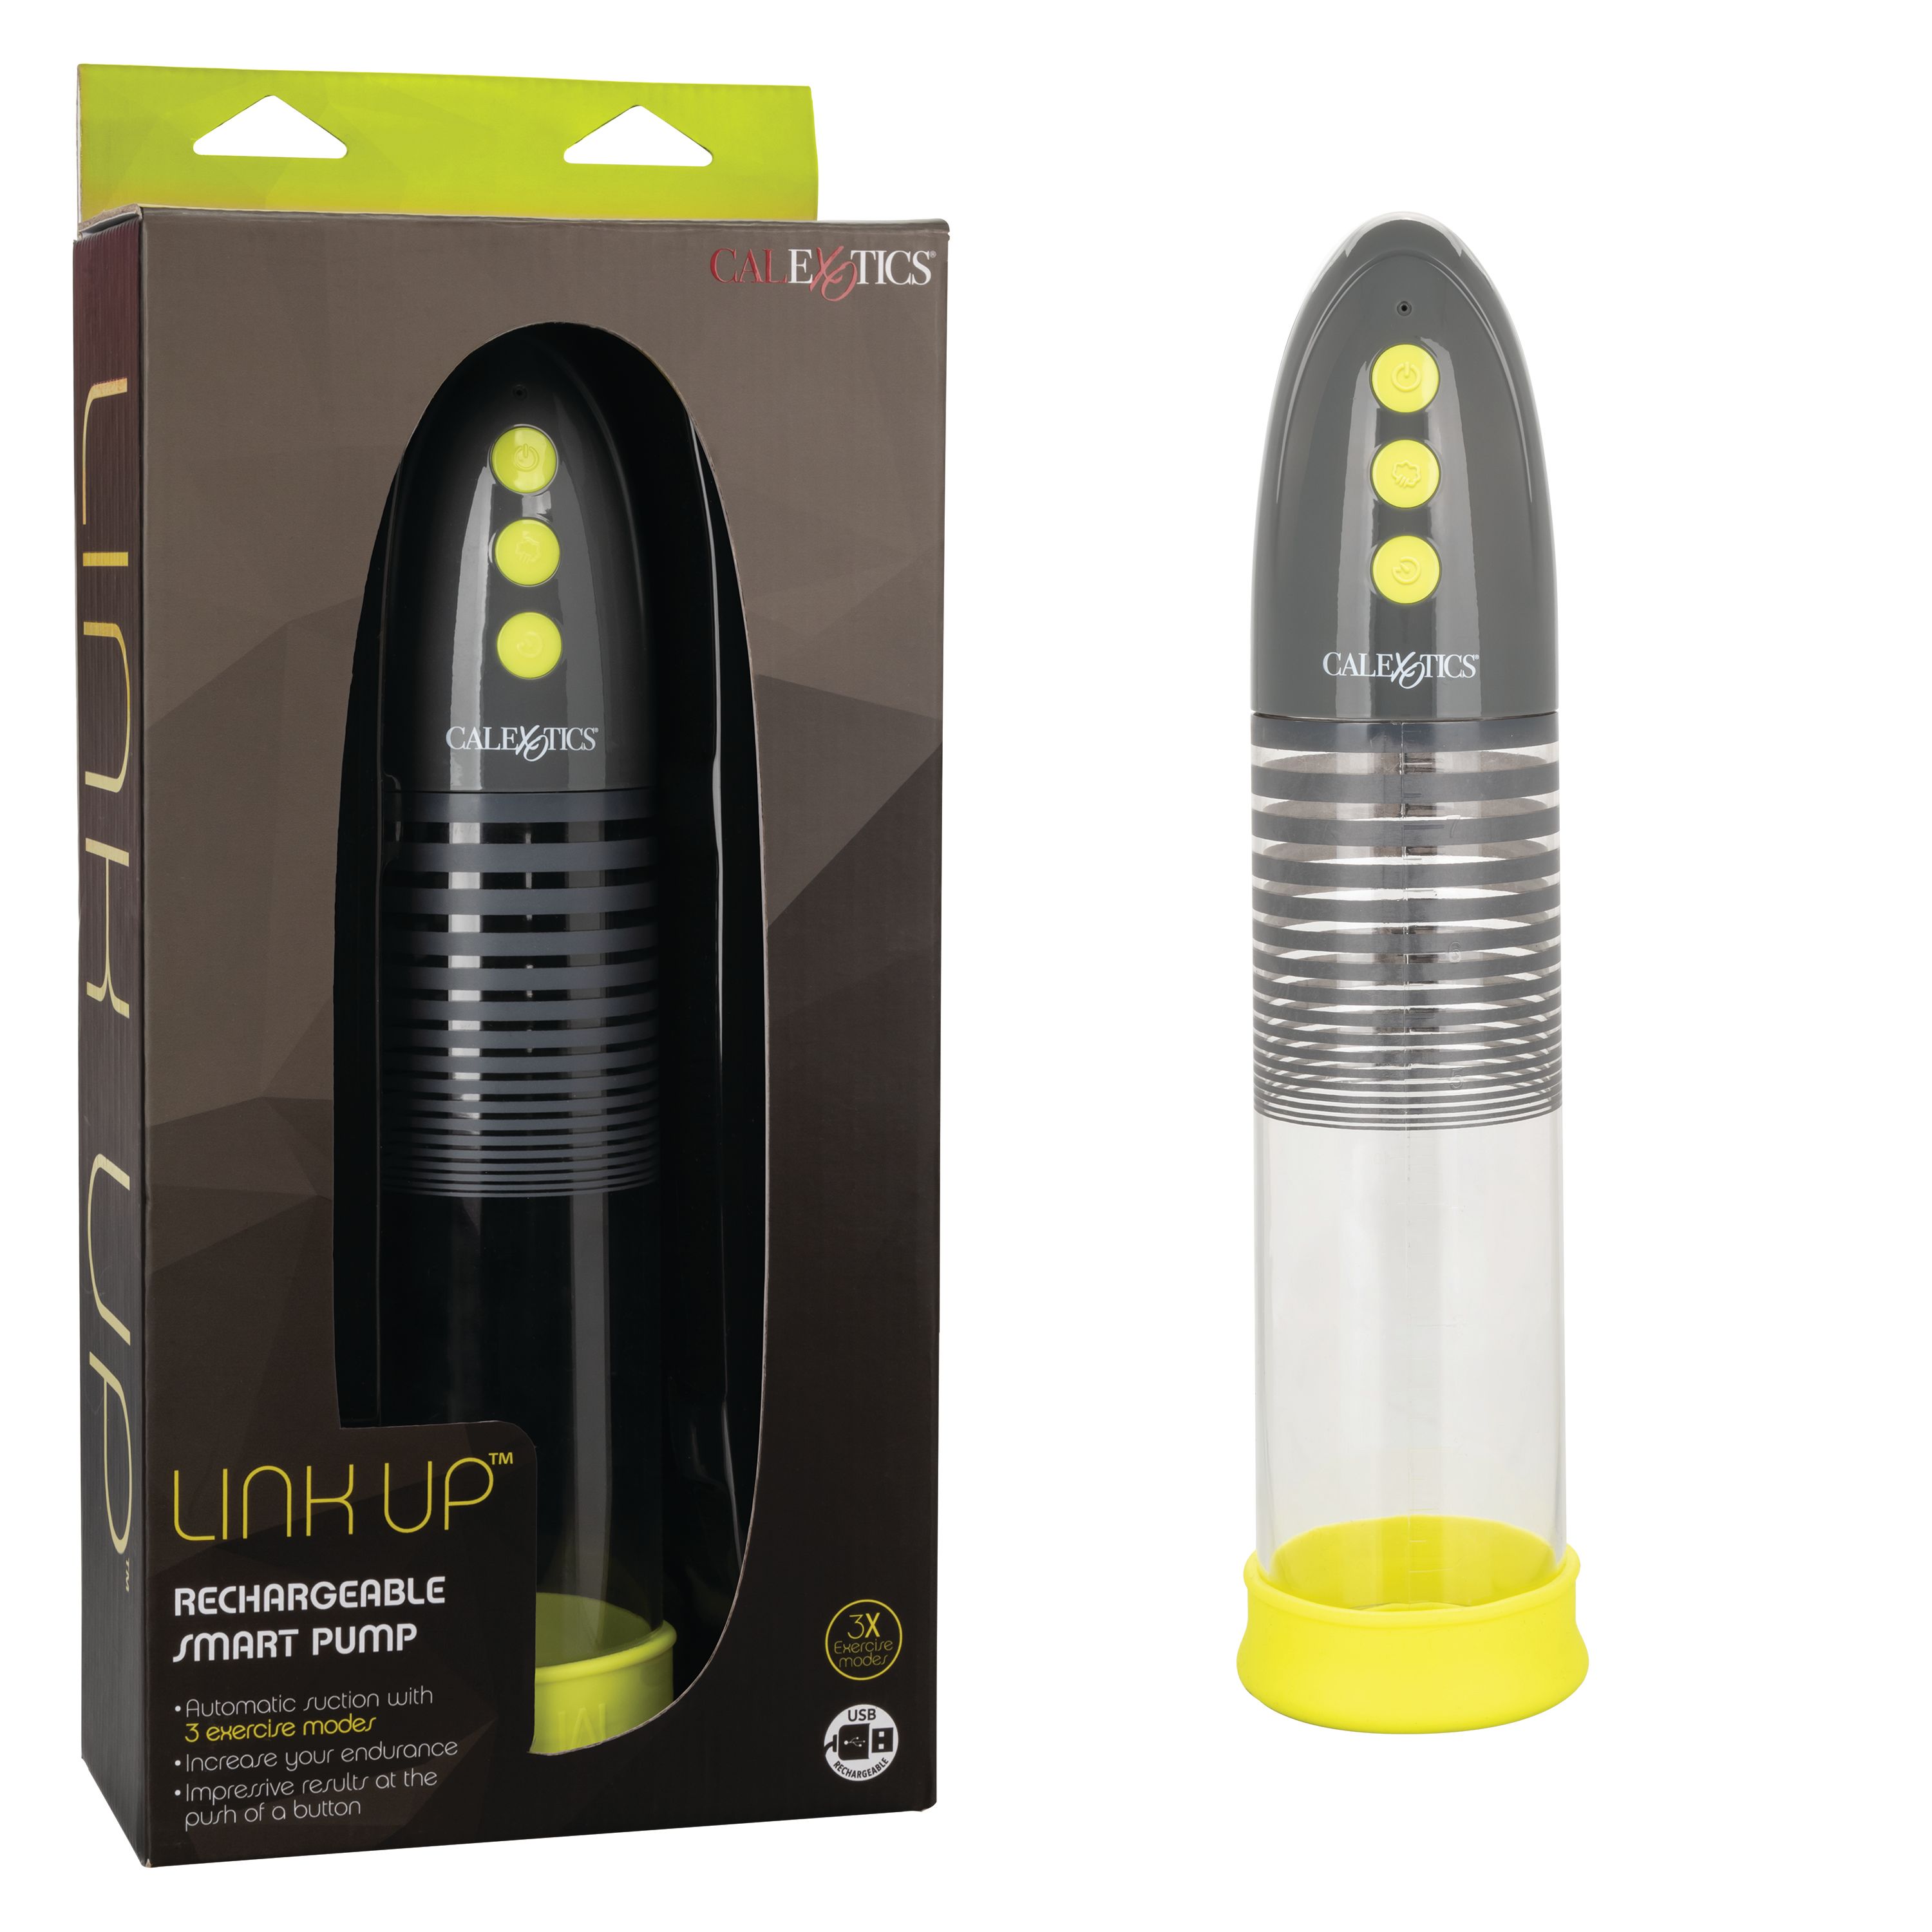 LINK UP RECHARGEABLE SMART PUMP - Click Image to Close